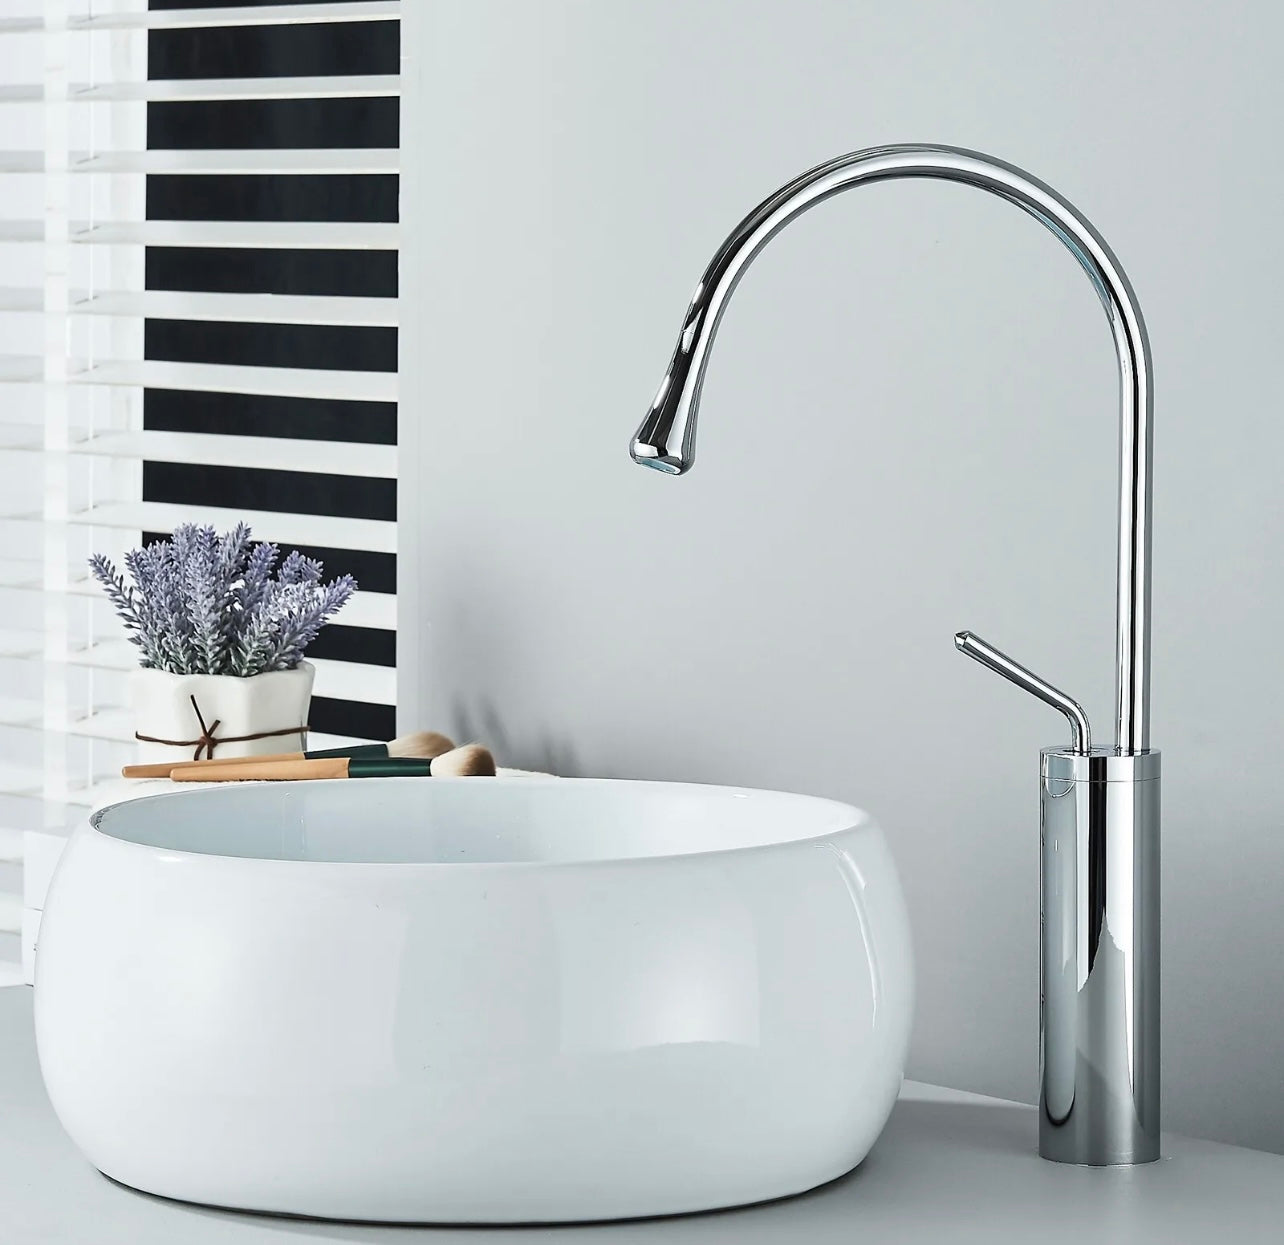 Chrome waterfall goose neck vessel faucet